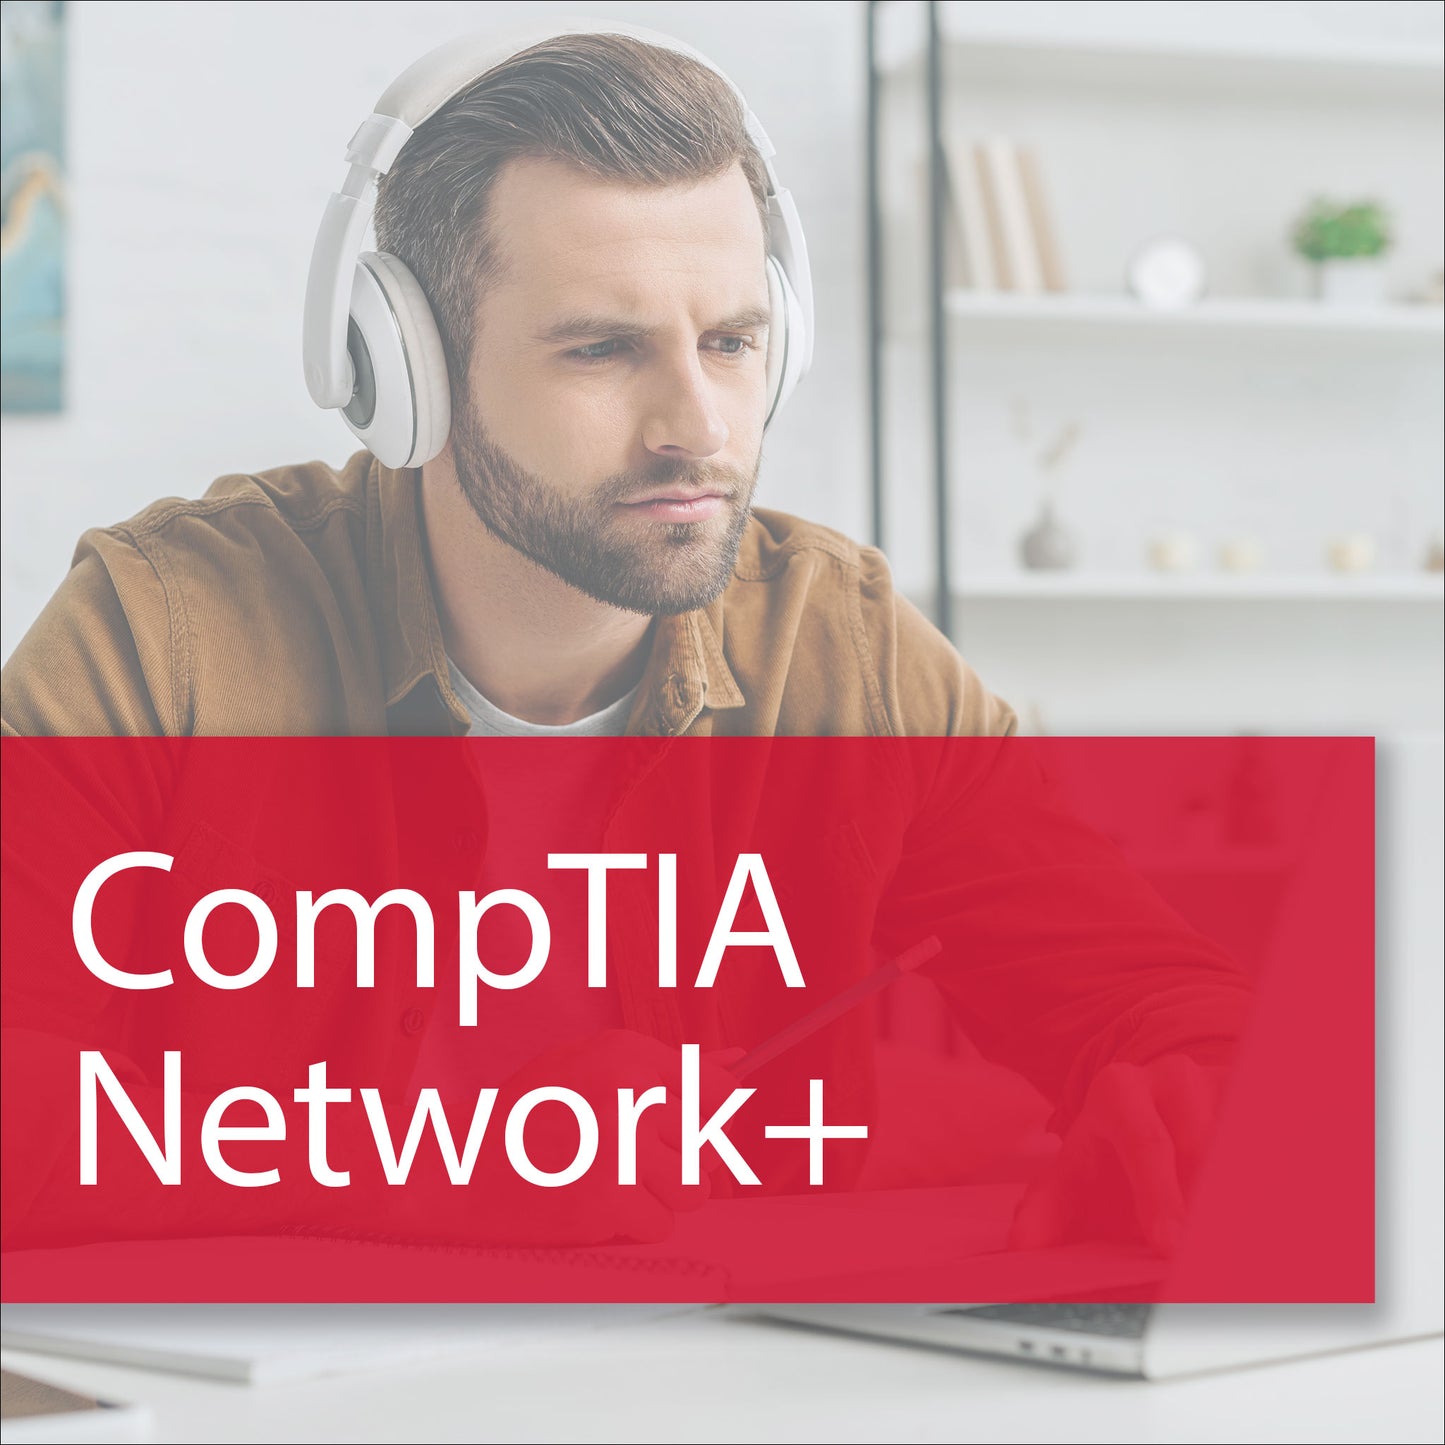 CompTIA Network+ – Shop CED Solutions